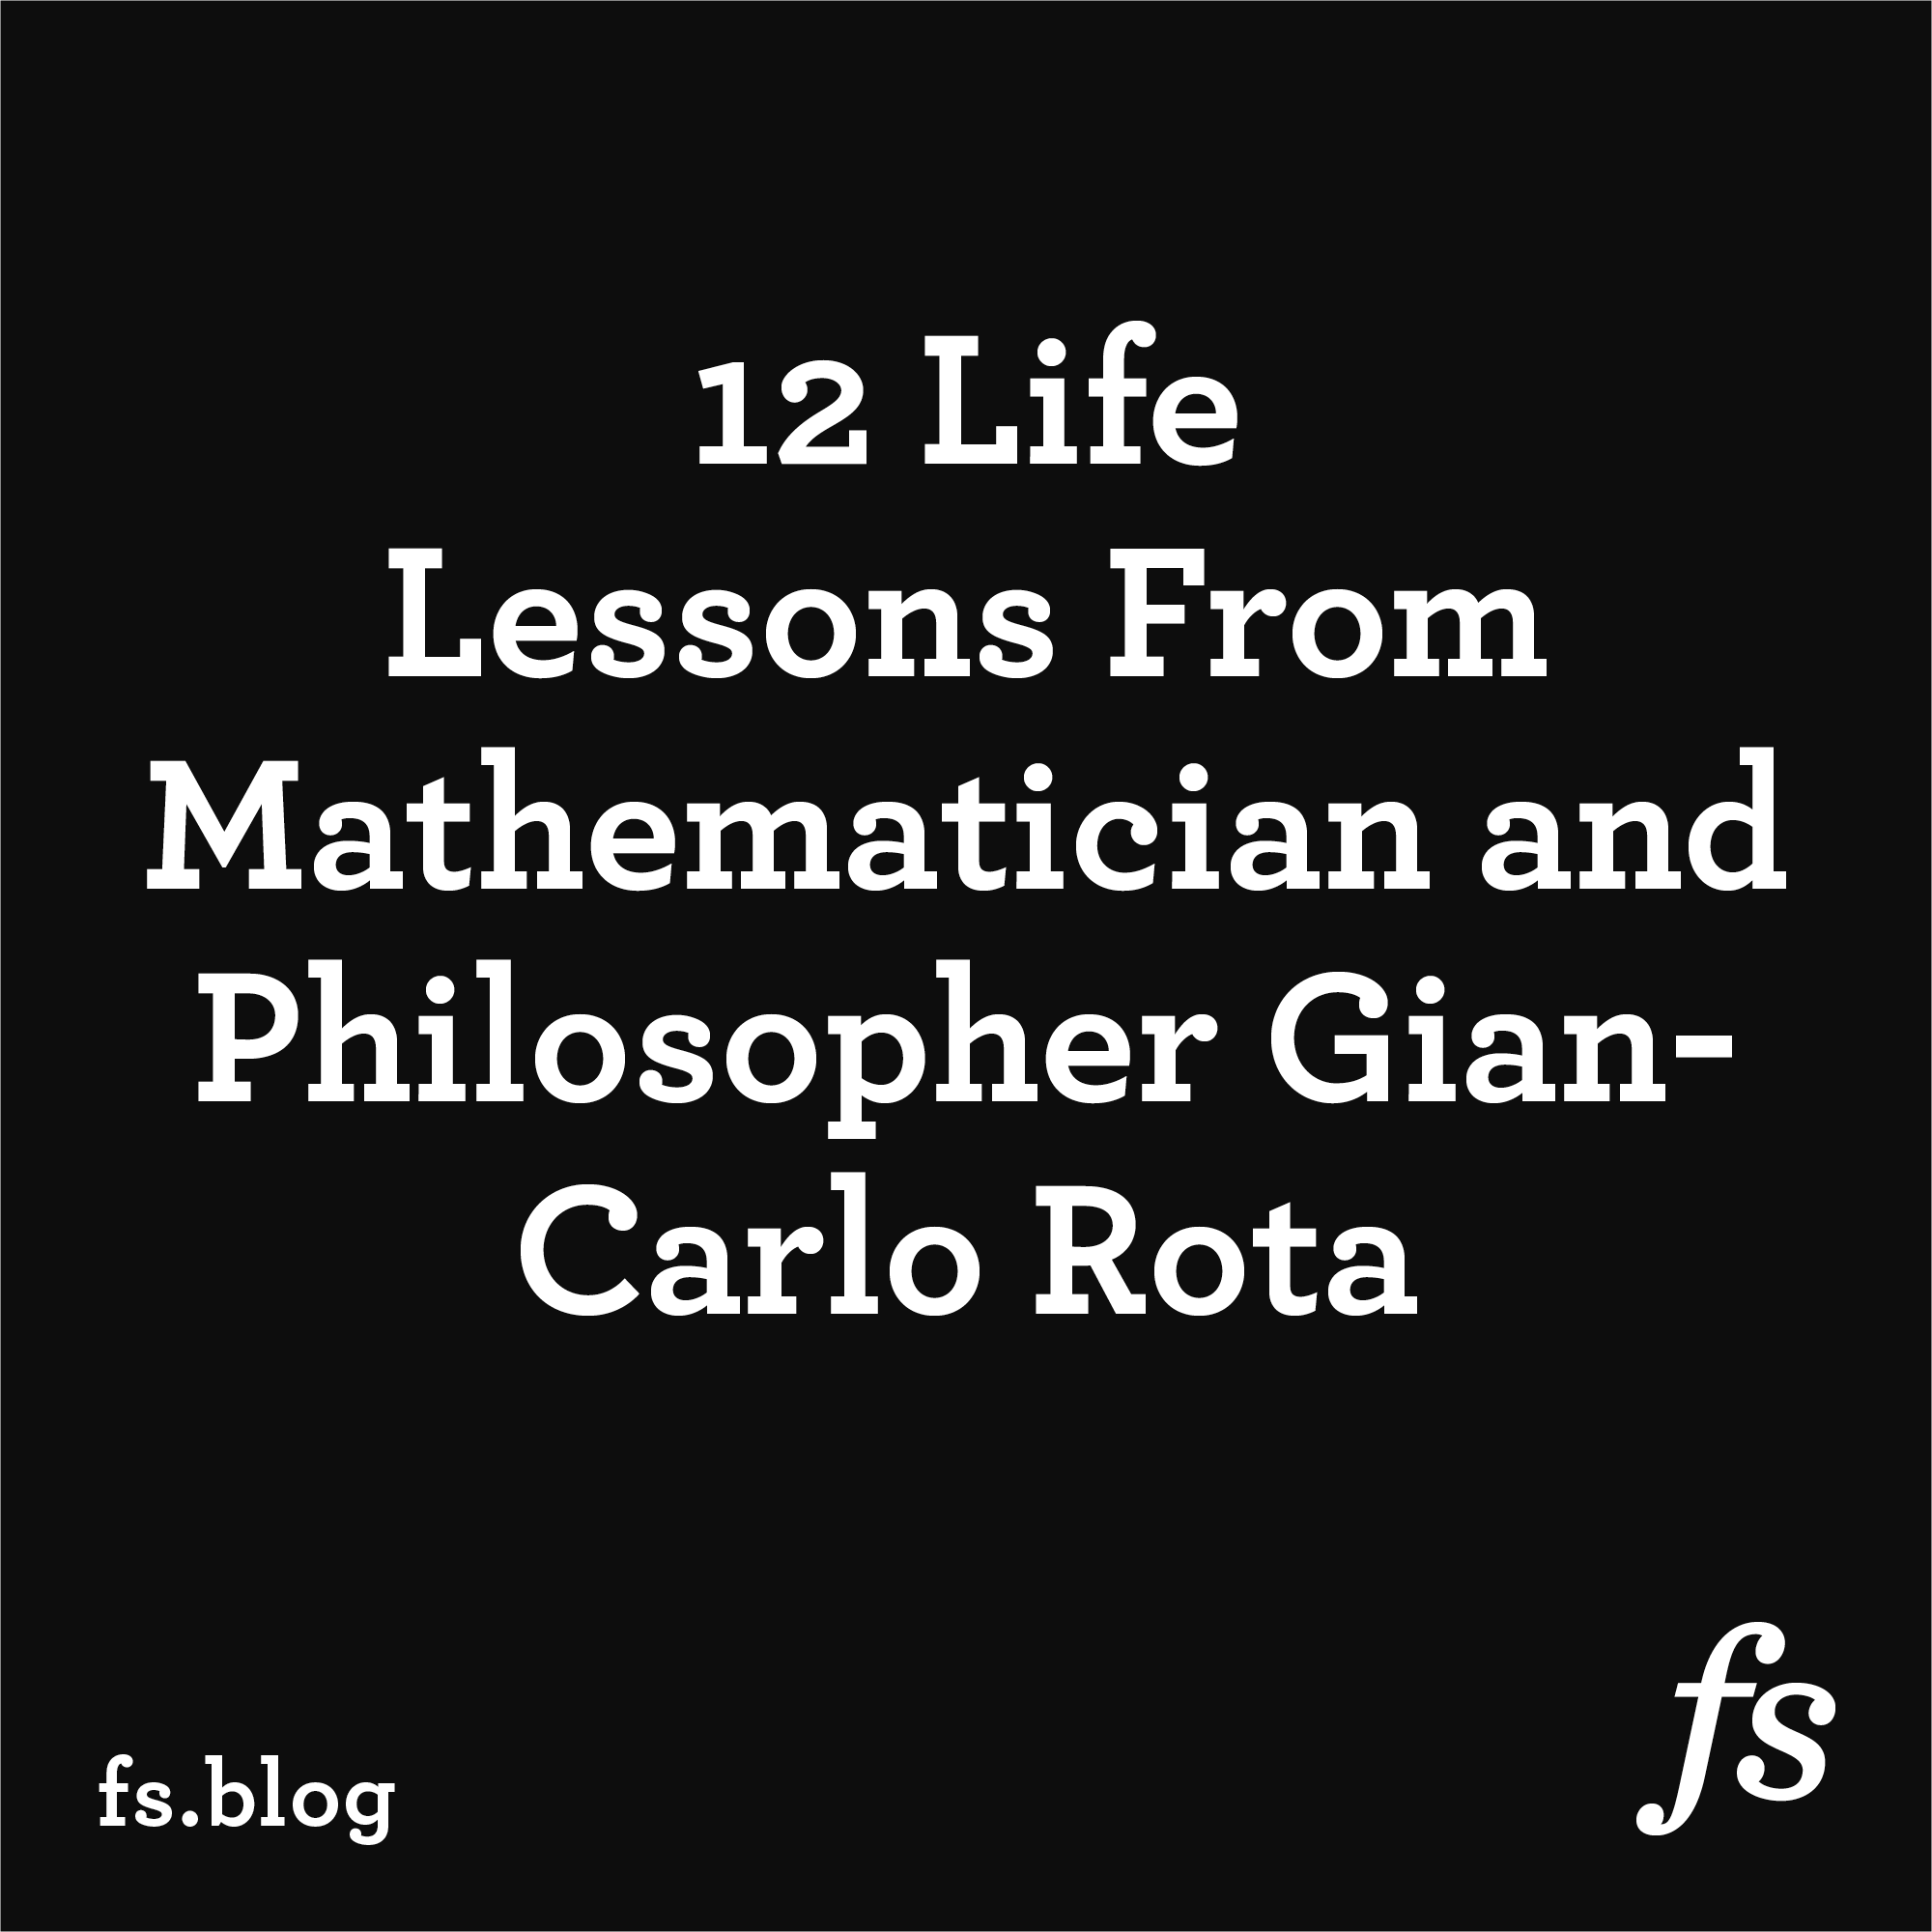 12 Life Lessons From Mathematician and Philosopher Gian-Carlo Rota